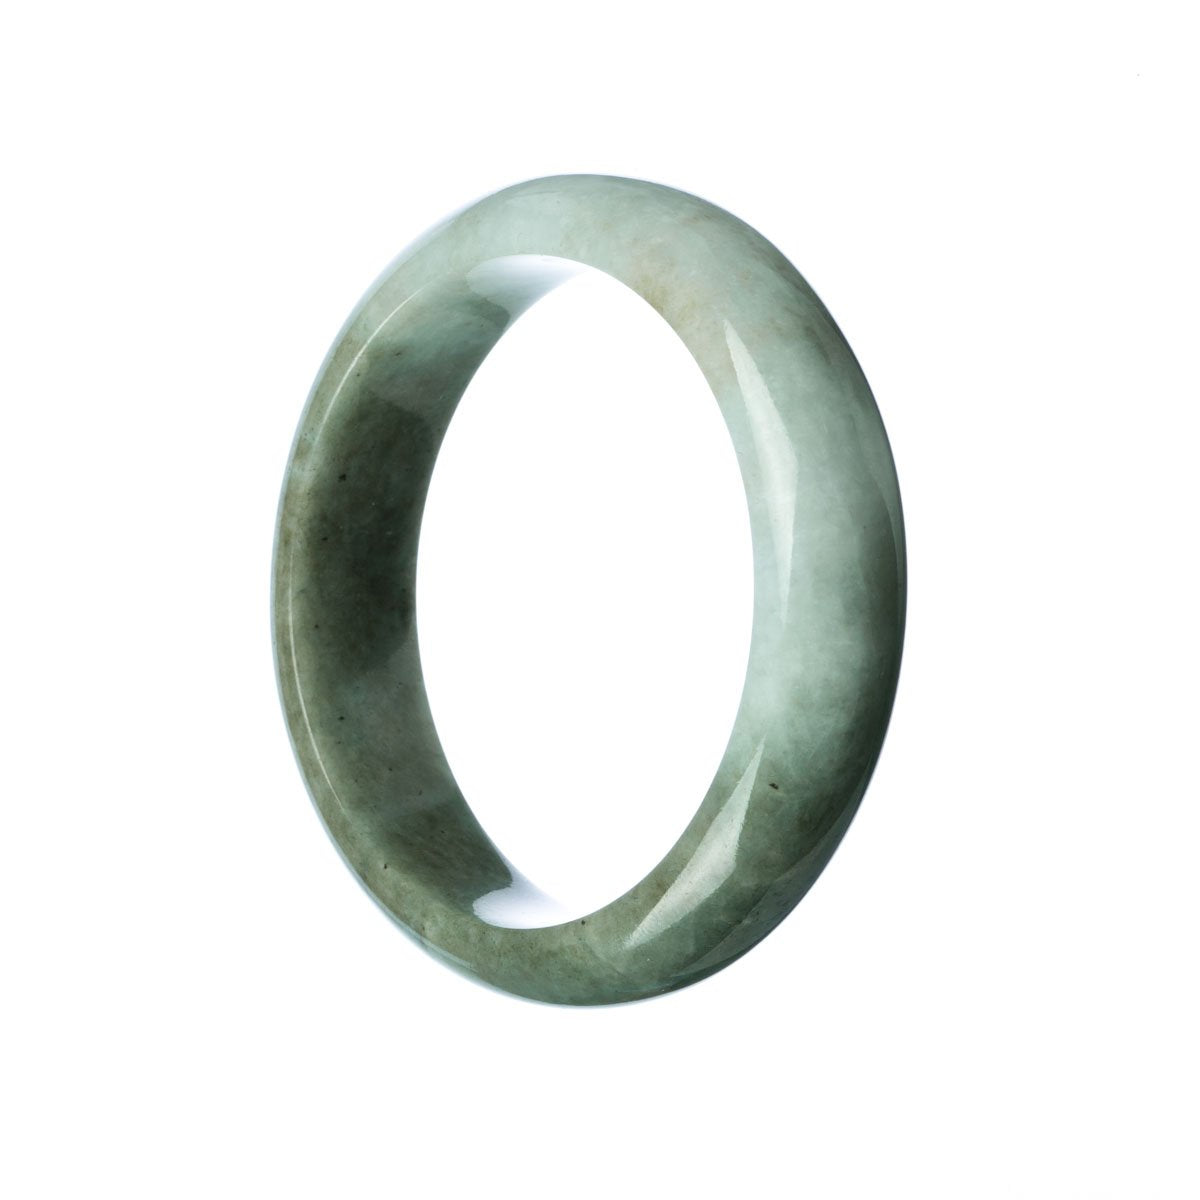 A beautiful green and white jade bangle bracelet in a half-moon shape, made from genuine Grade A jade.